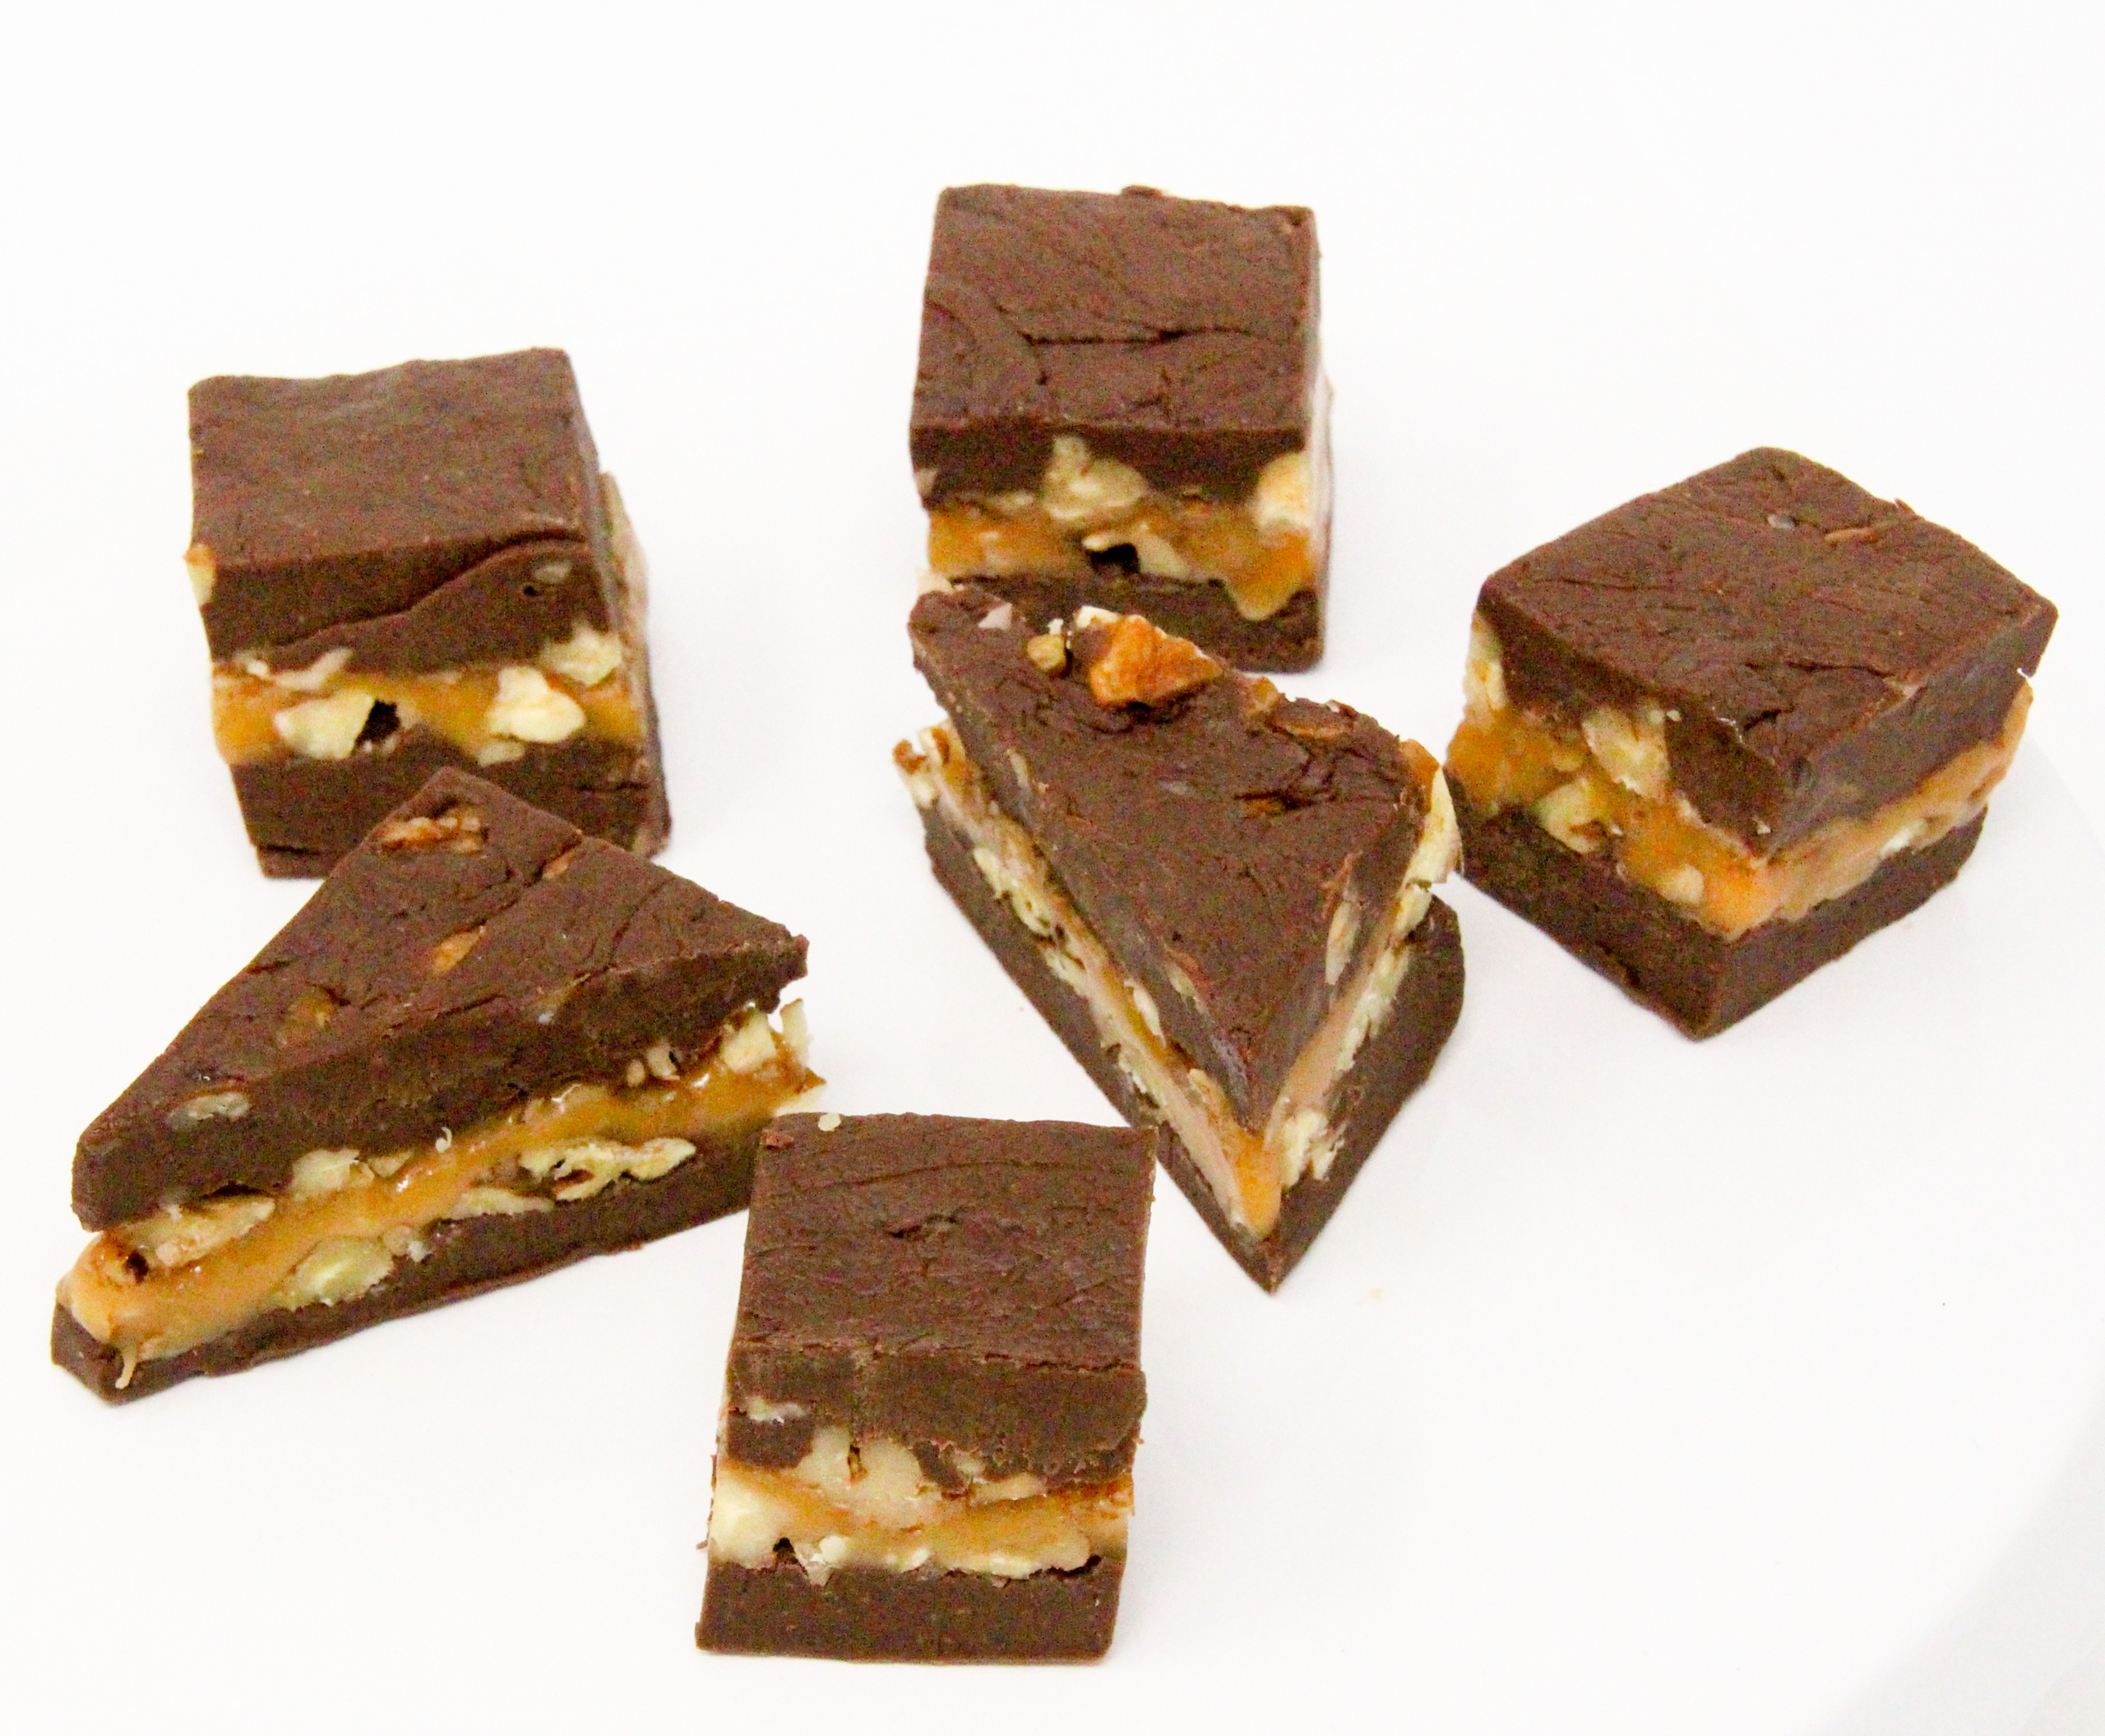 Turtle Fudge utilizes pantry-stable items like caramel pieces, chocolate chips, and sweetened condensed milk yet the resulting treat is candy shop worthy! Recipe shared with permission granted by Nancy Coco, author of A Midsummer Night's Fudge. 